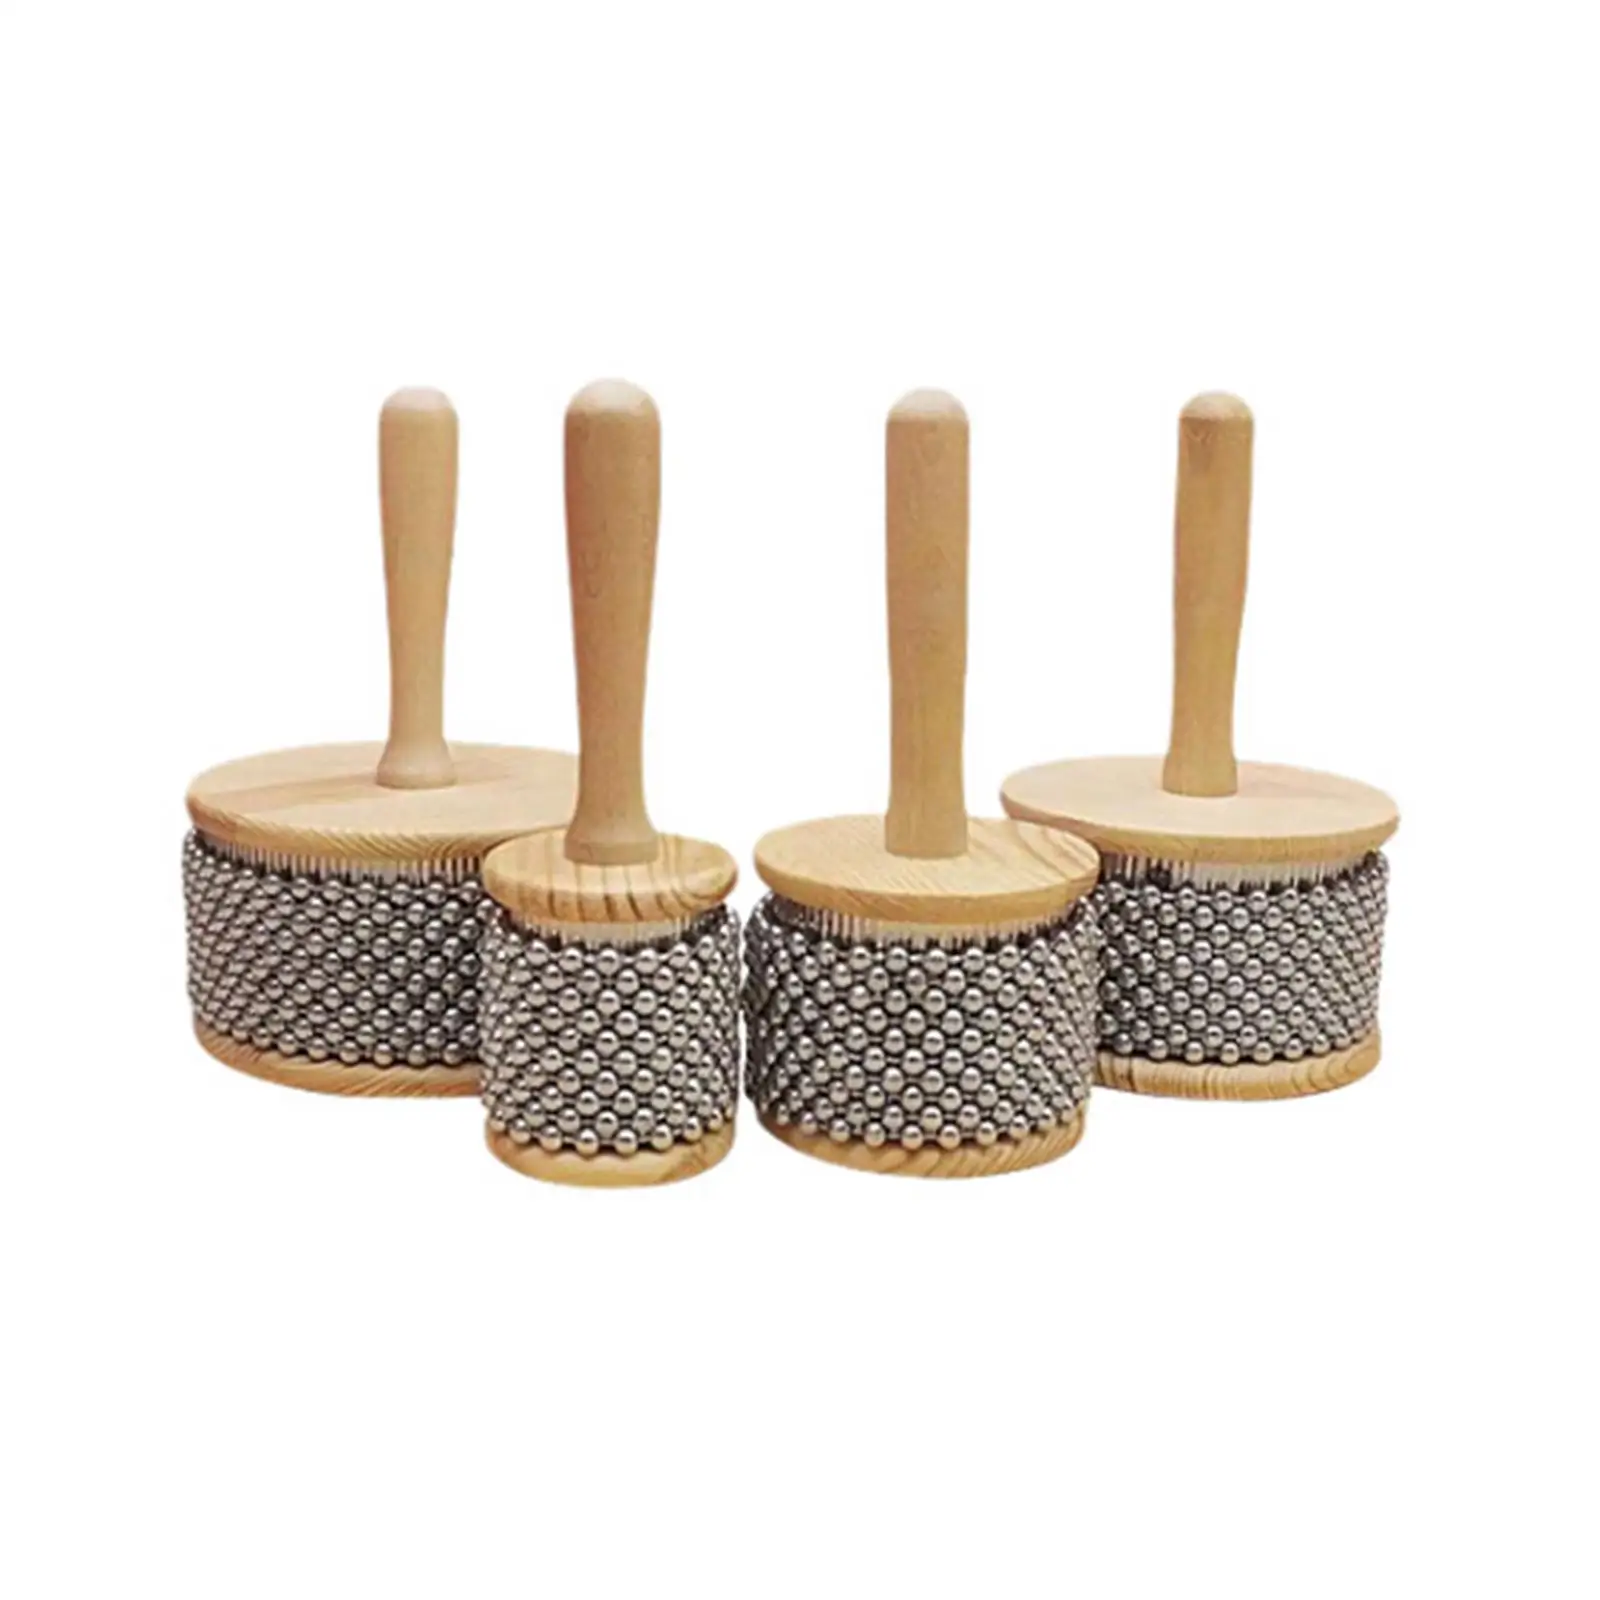 Wooden Hand Cabasa Shaker Percussion Wooden Cabasa Instrument Kids Gift Portable Baby Shower Gifts Fun for Playing at Home Band